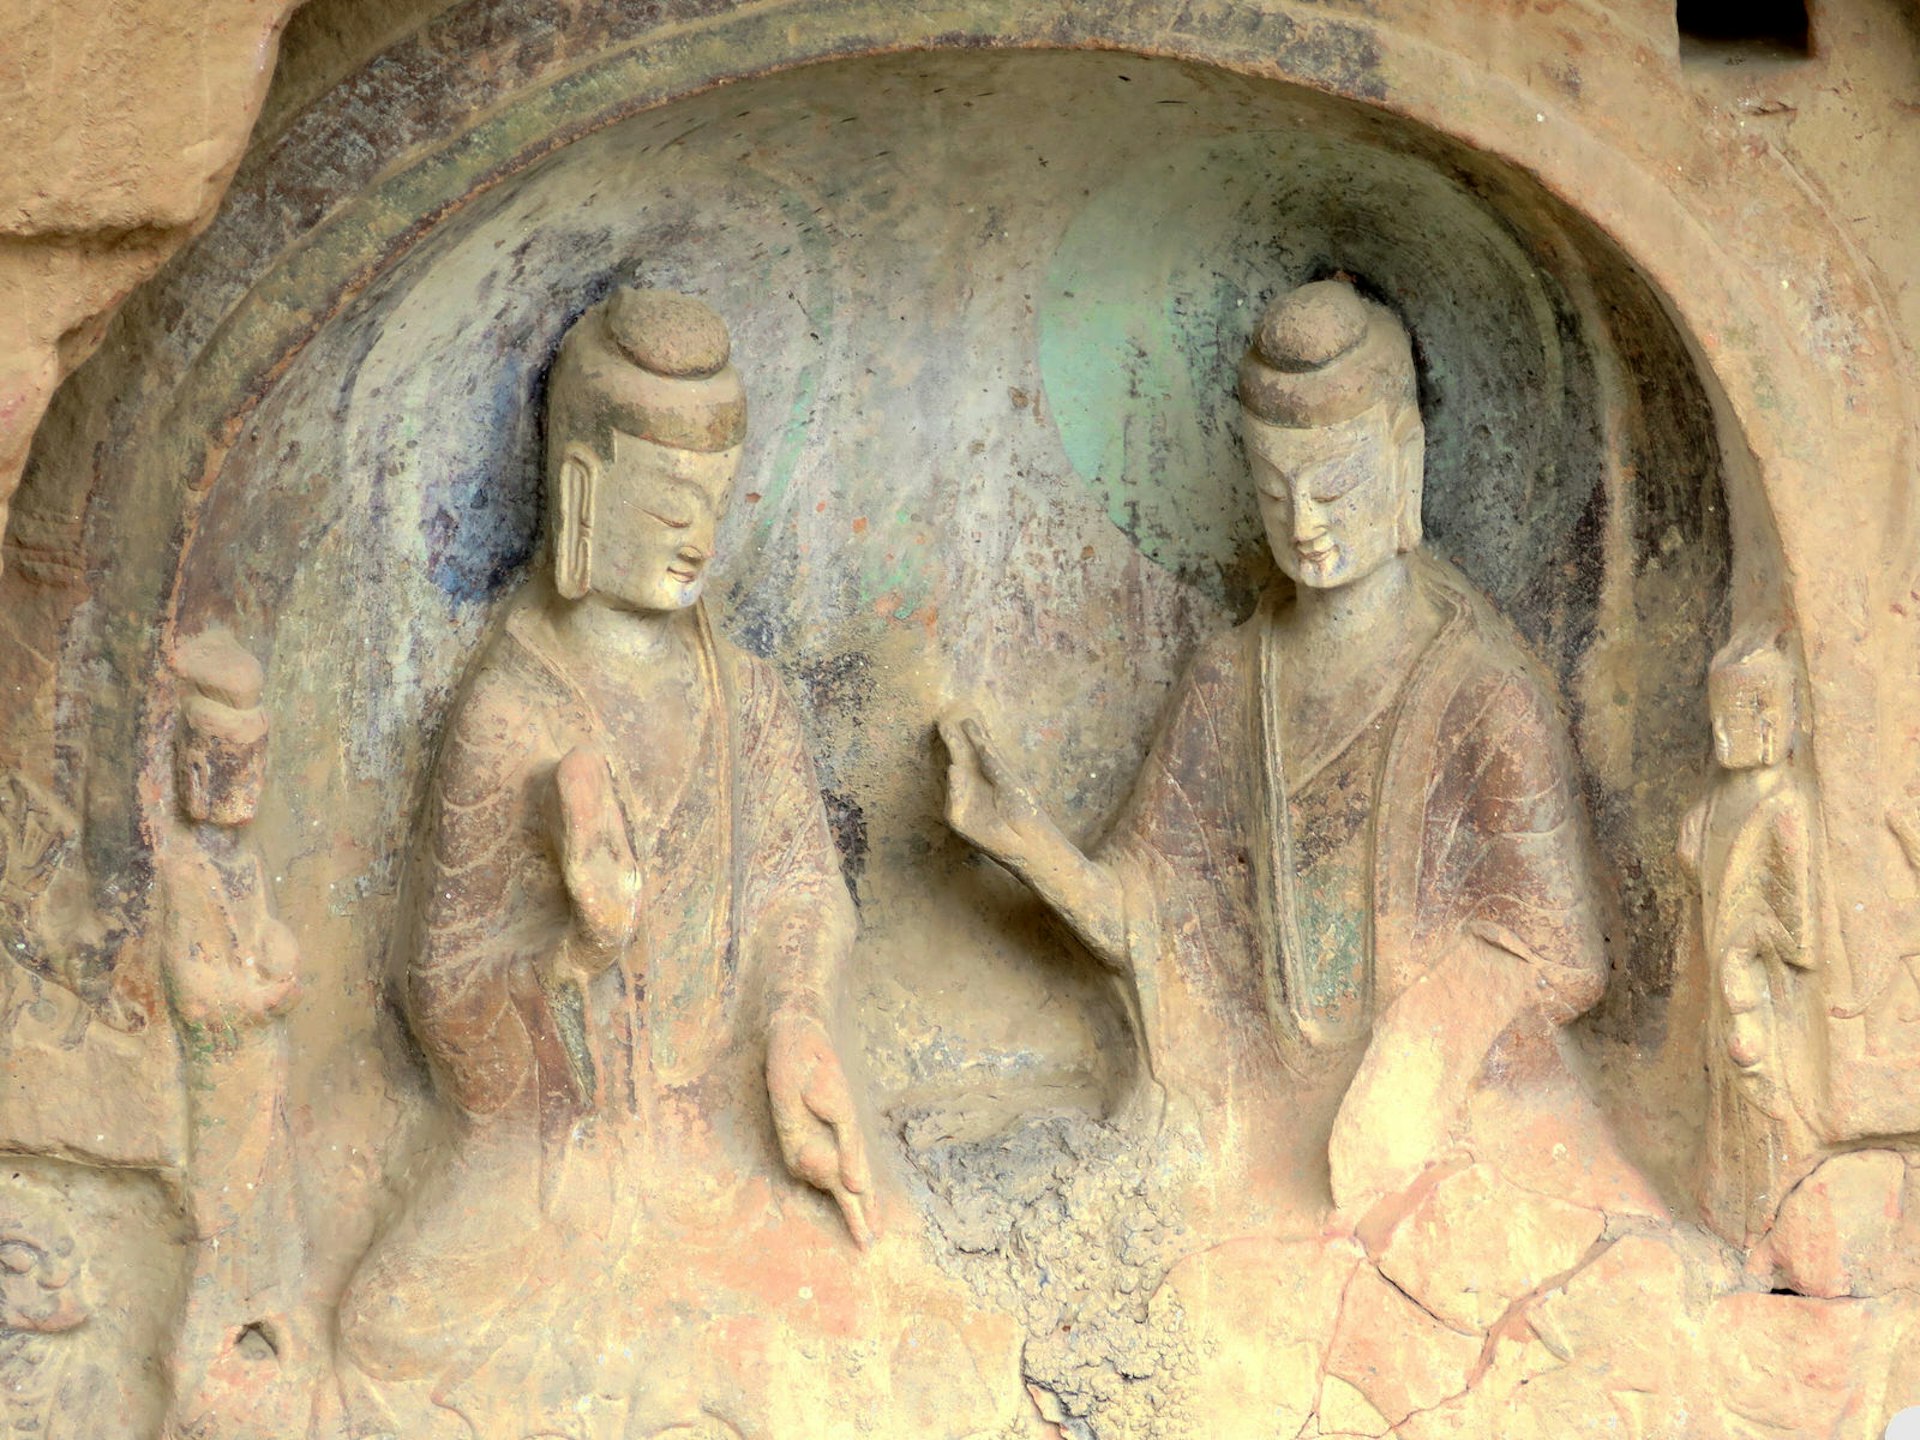 Remarkably well-preserved Buddhis reliefs at Bingling Si © Megan Eaves / Lonely Planet